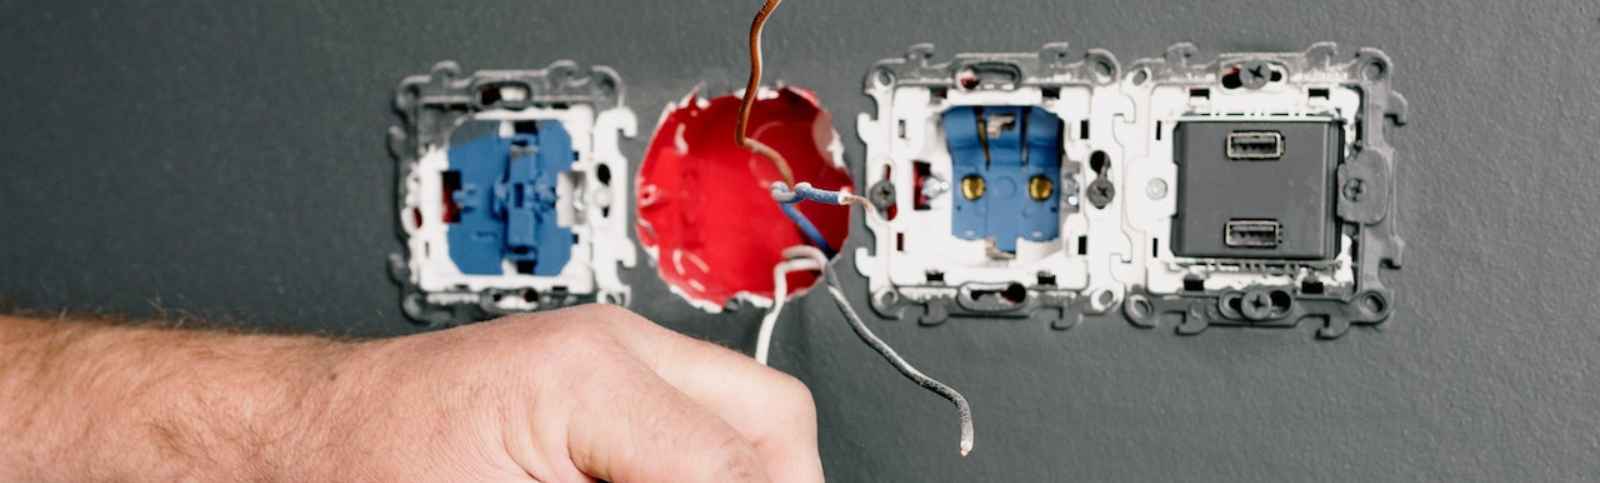 How to Get an Apprenticeship in Electrical Work Even If You Have No Experience